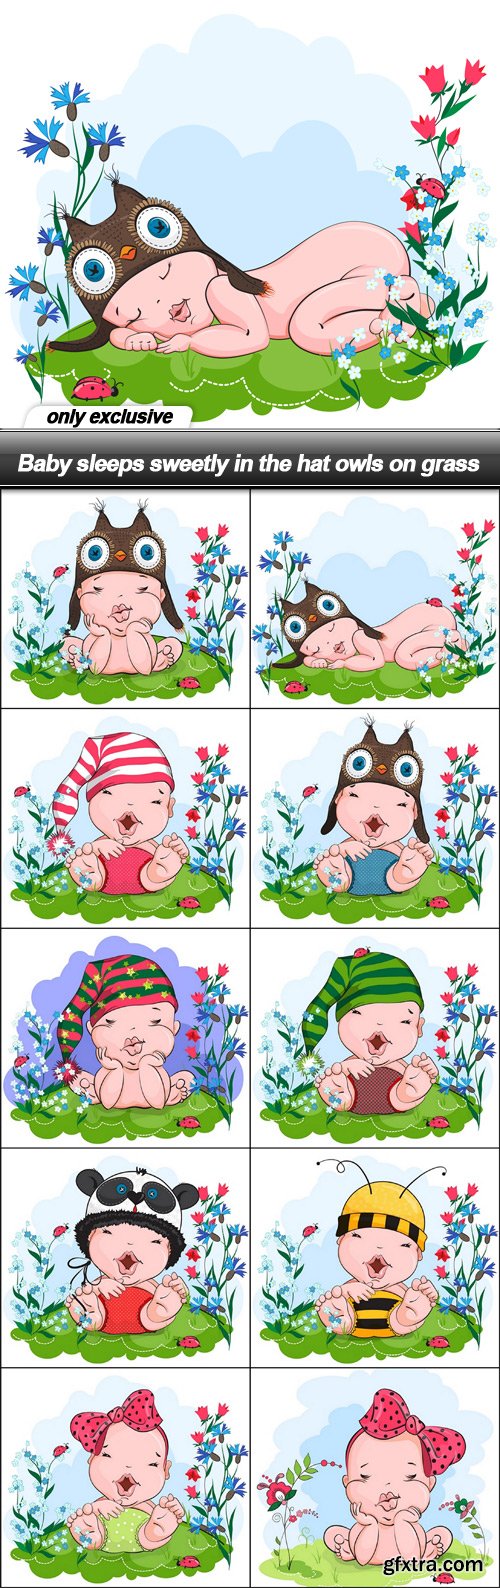 Baby sleeps sweetly in the hat owls on grass - 11 EPS